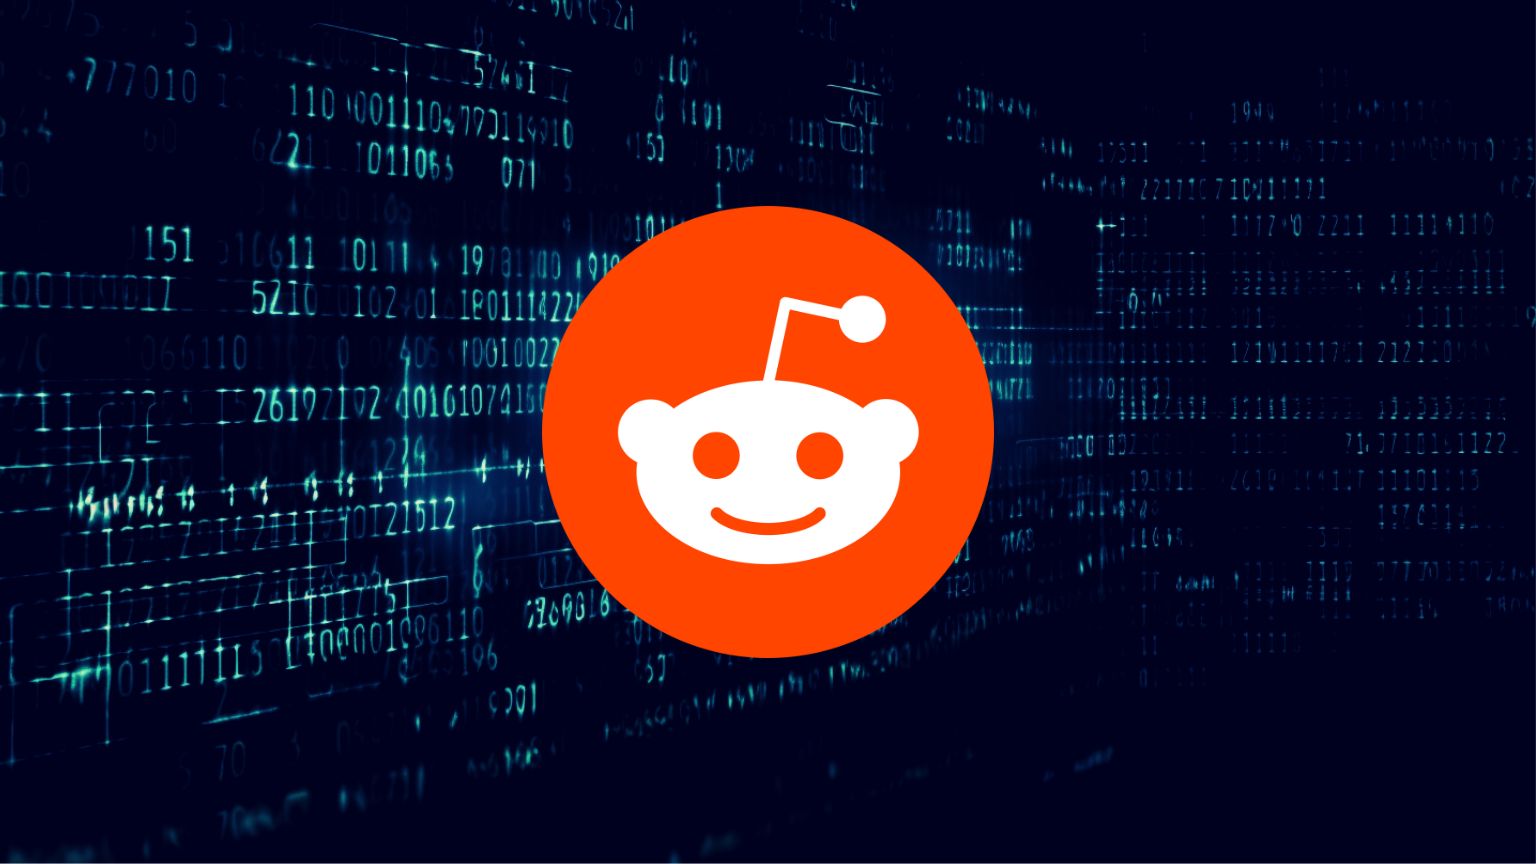 Reddit To Block Users From Opting Out of Personalized Ads